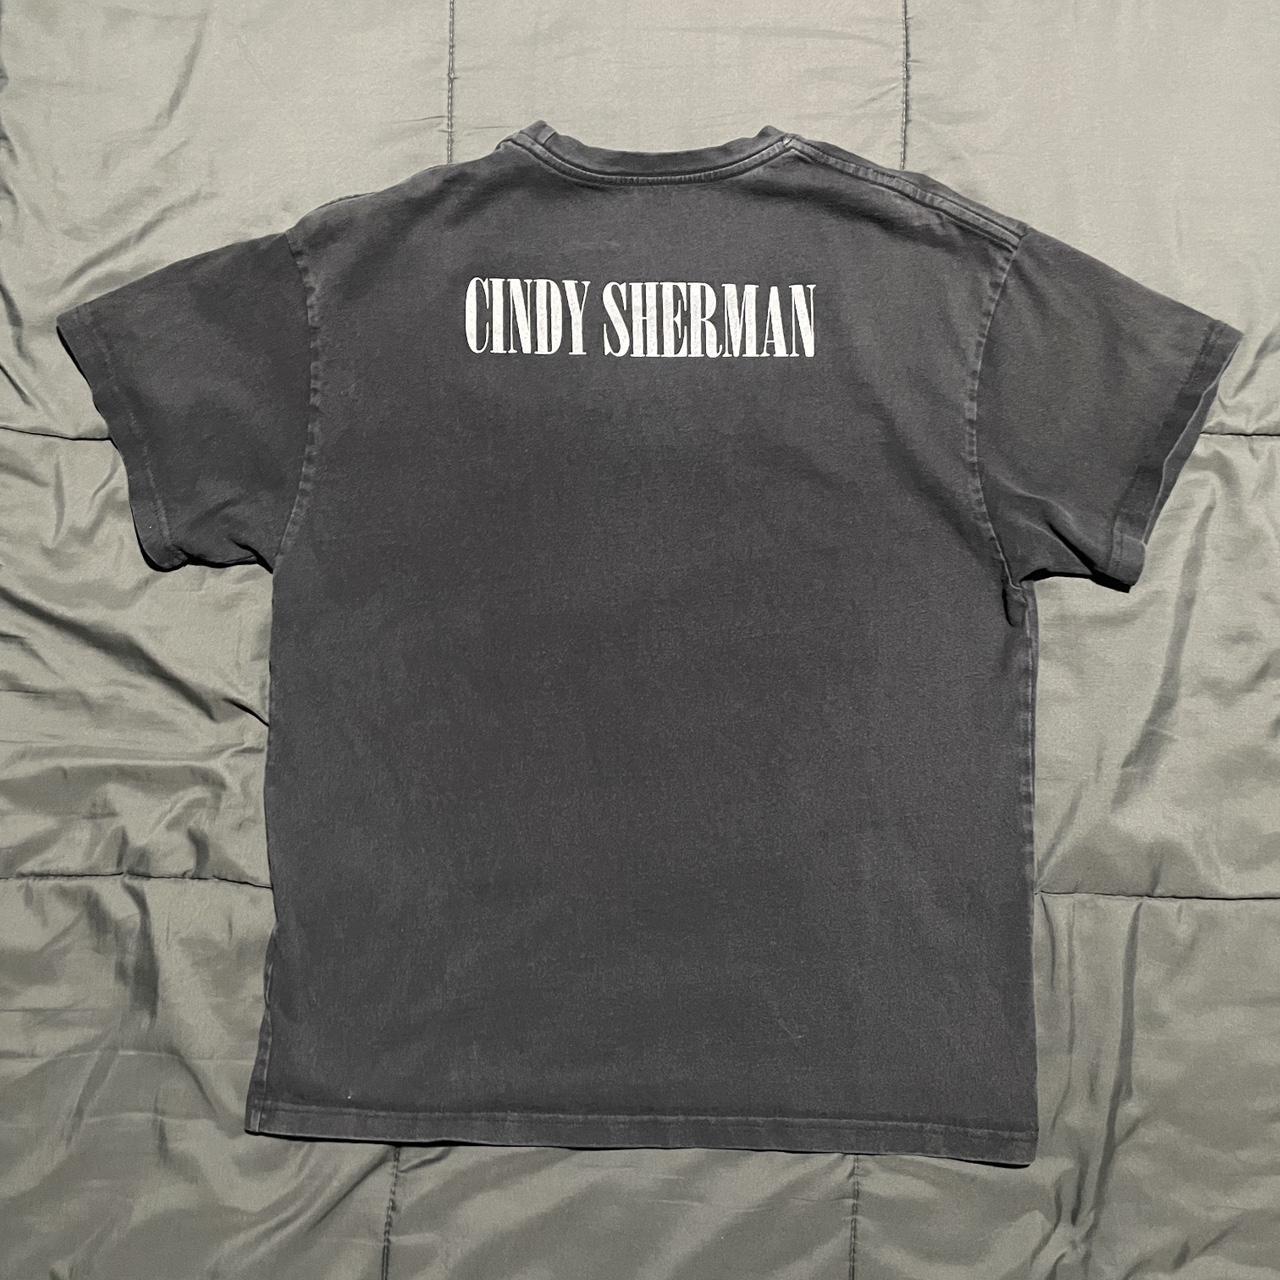 Cindy Sherman Undercover Tee, Size M, tts, #undercover